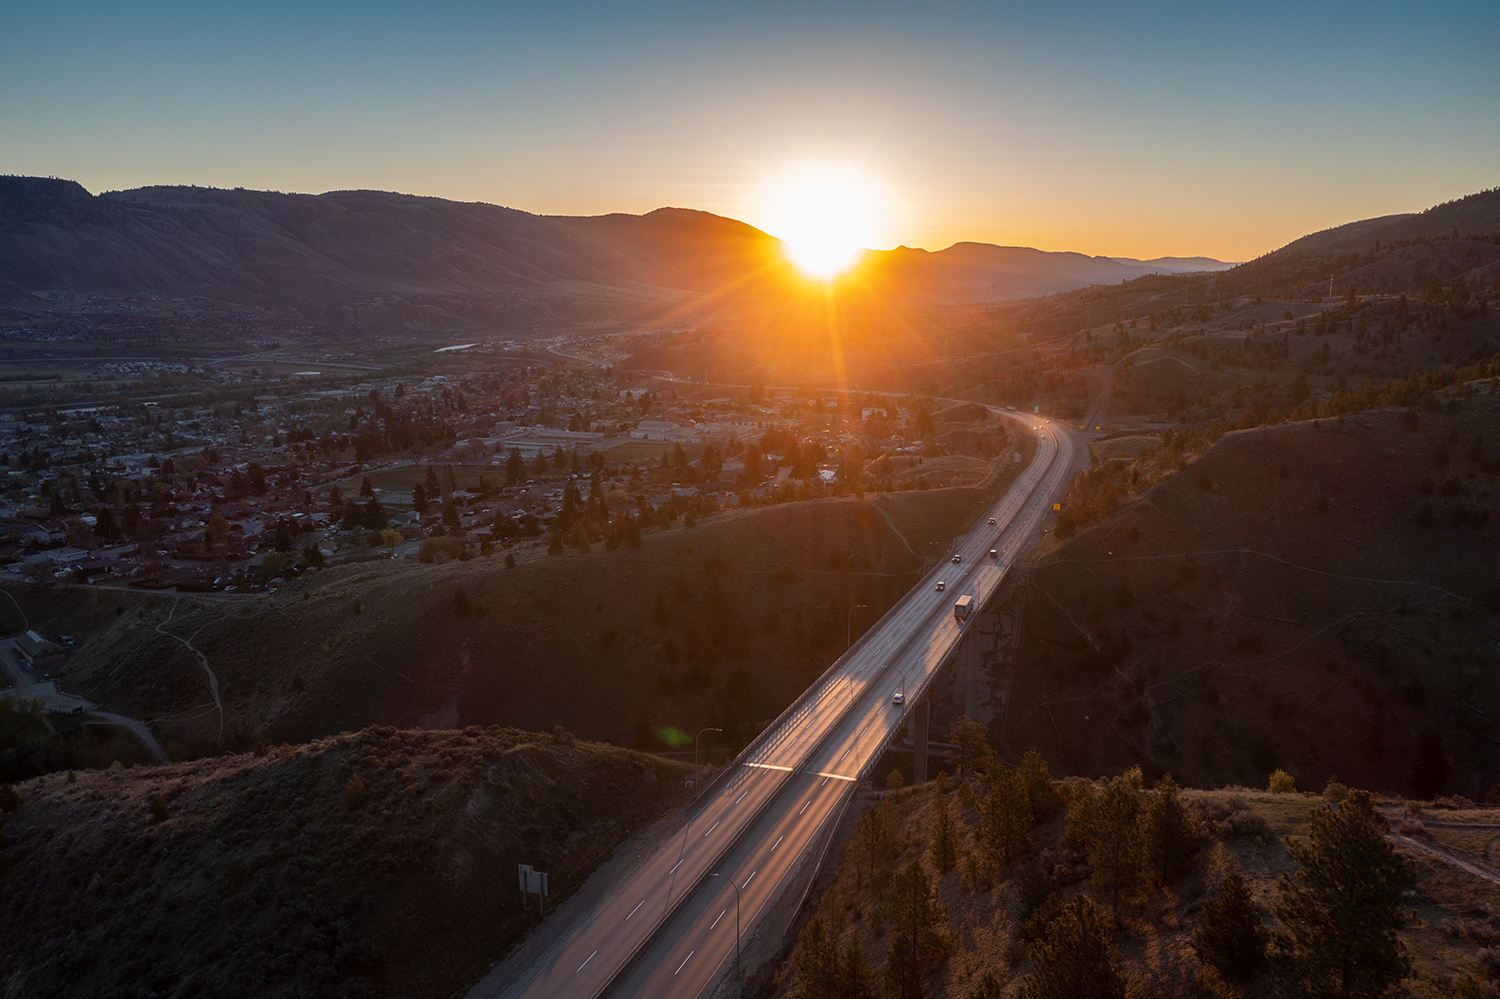 Kamloops City Aerial city with sunlight peeking from mountain and road